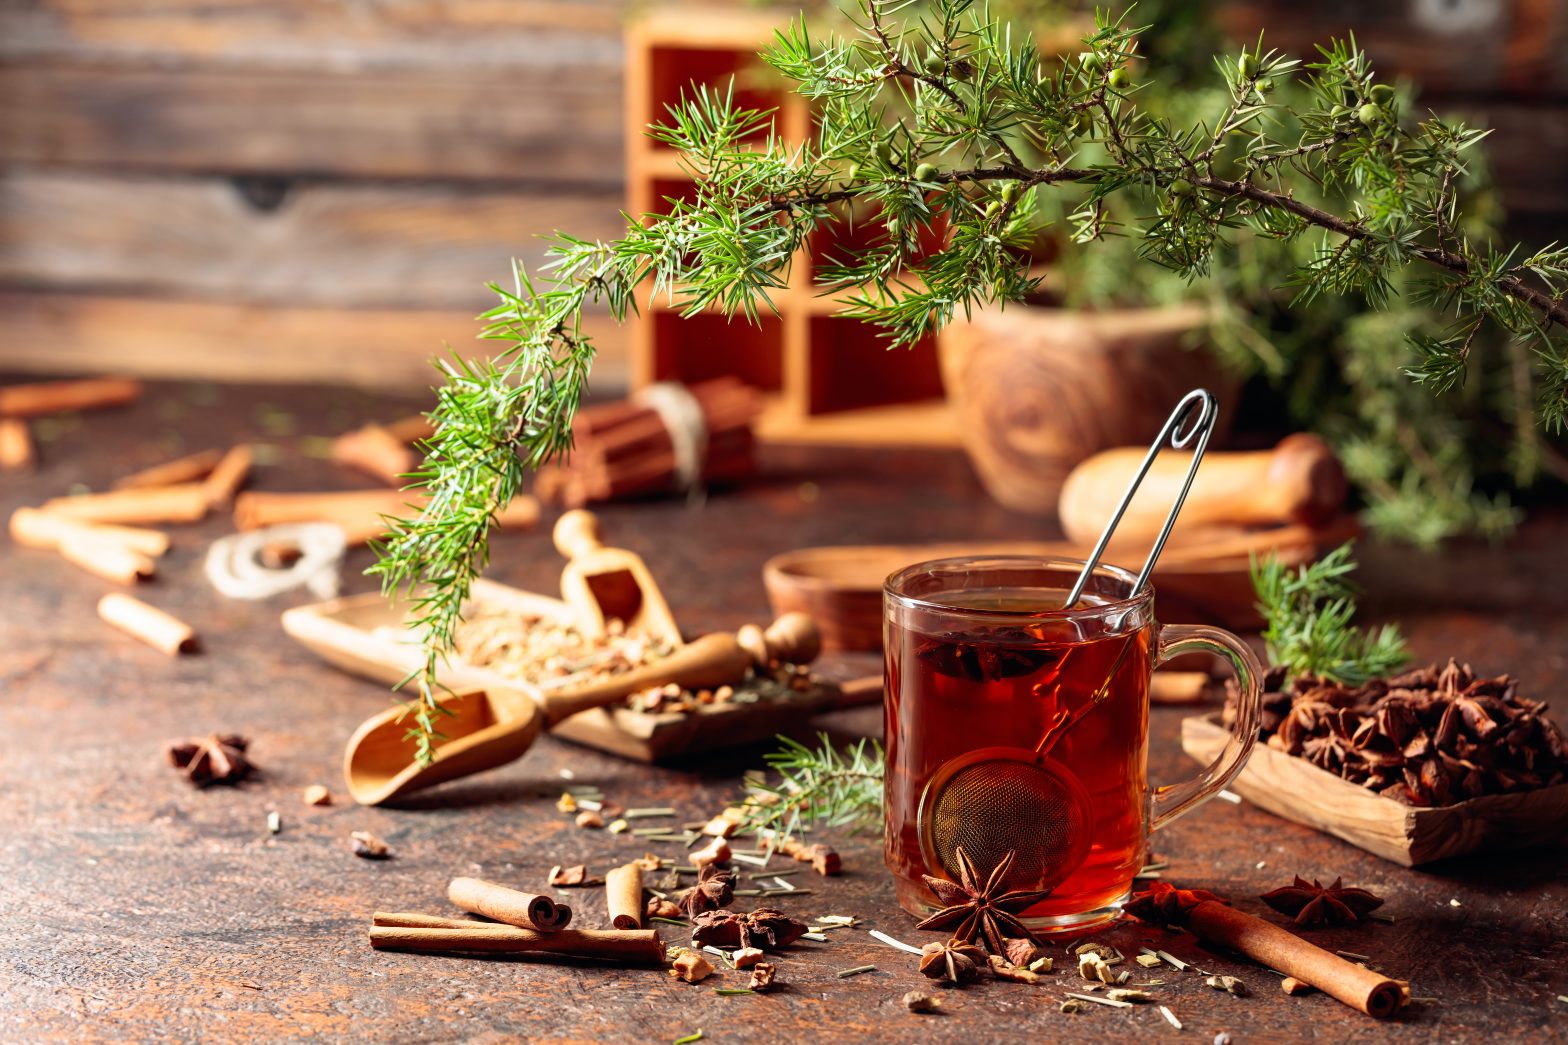 Herbal tea with cinnamon, and dried herbs on an brown table.